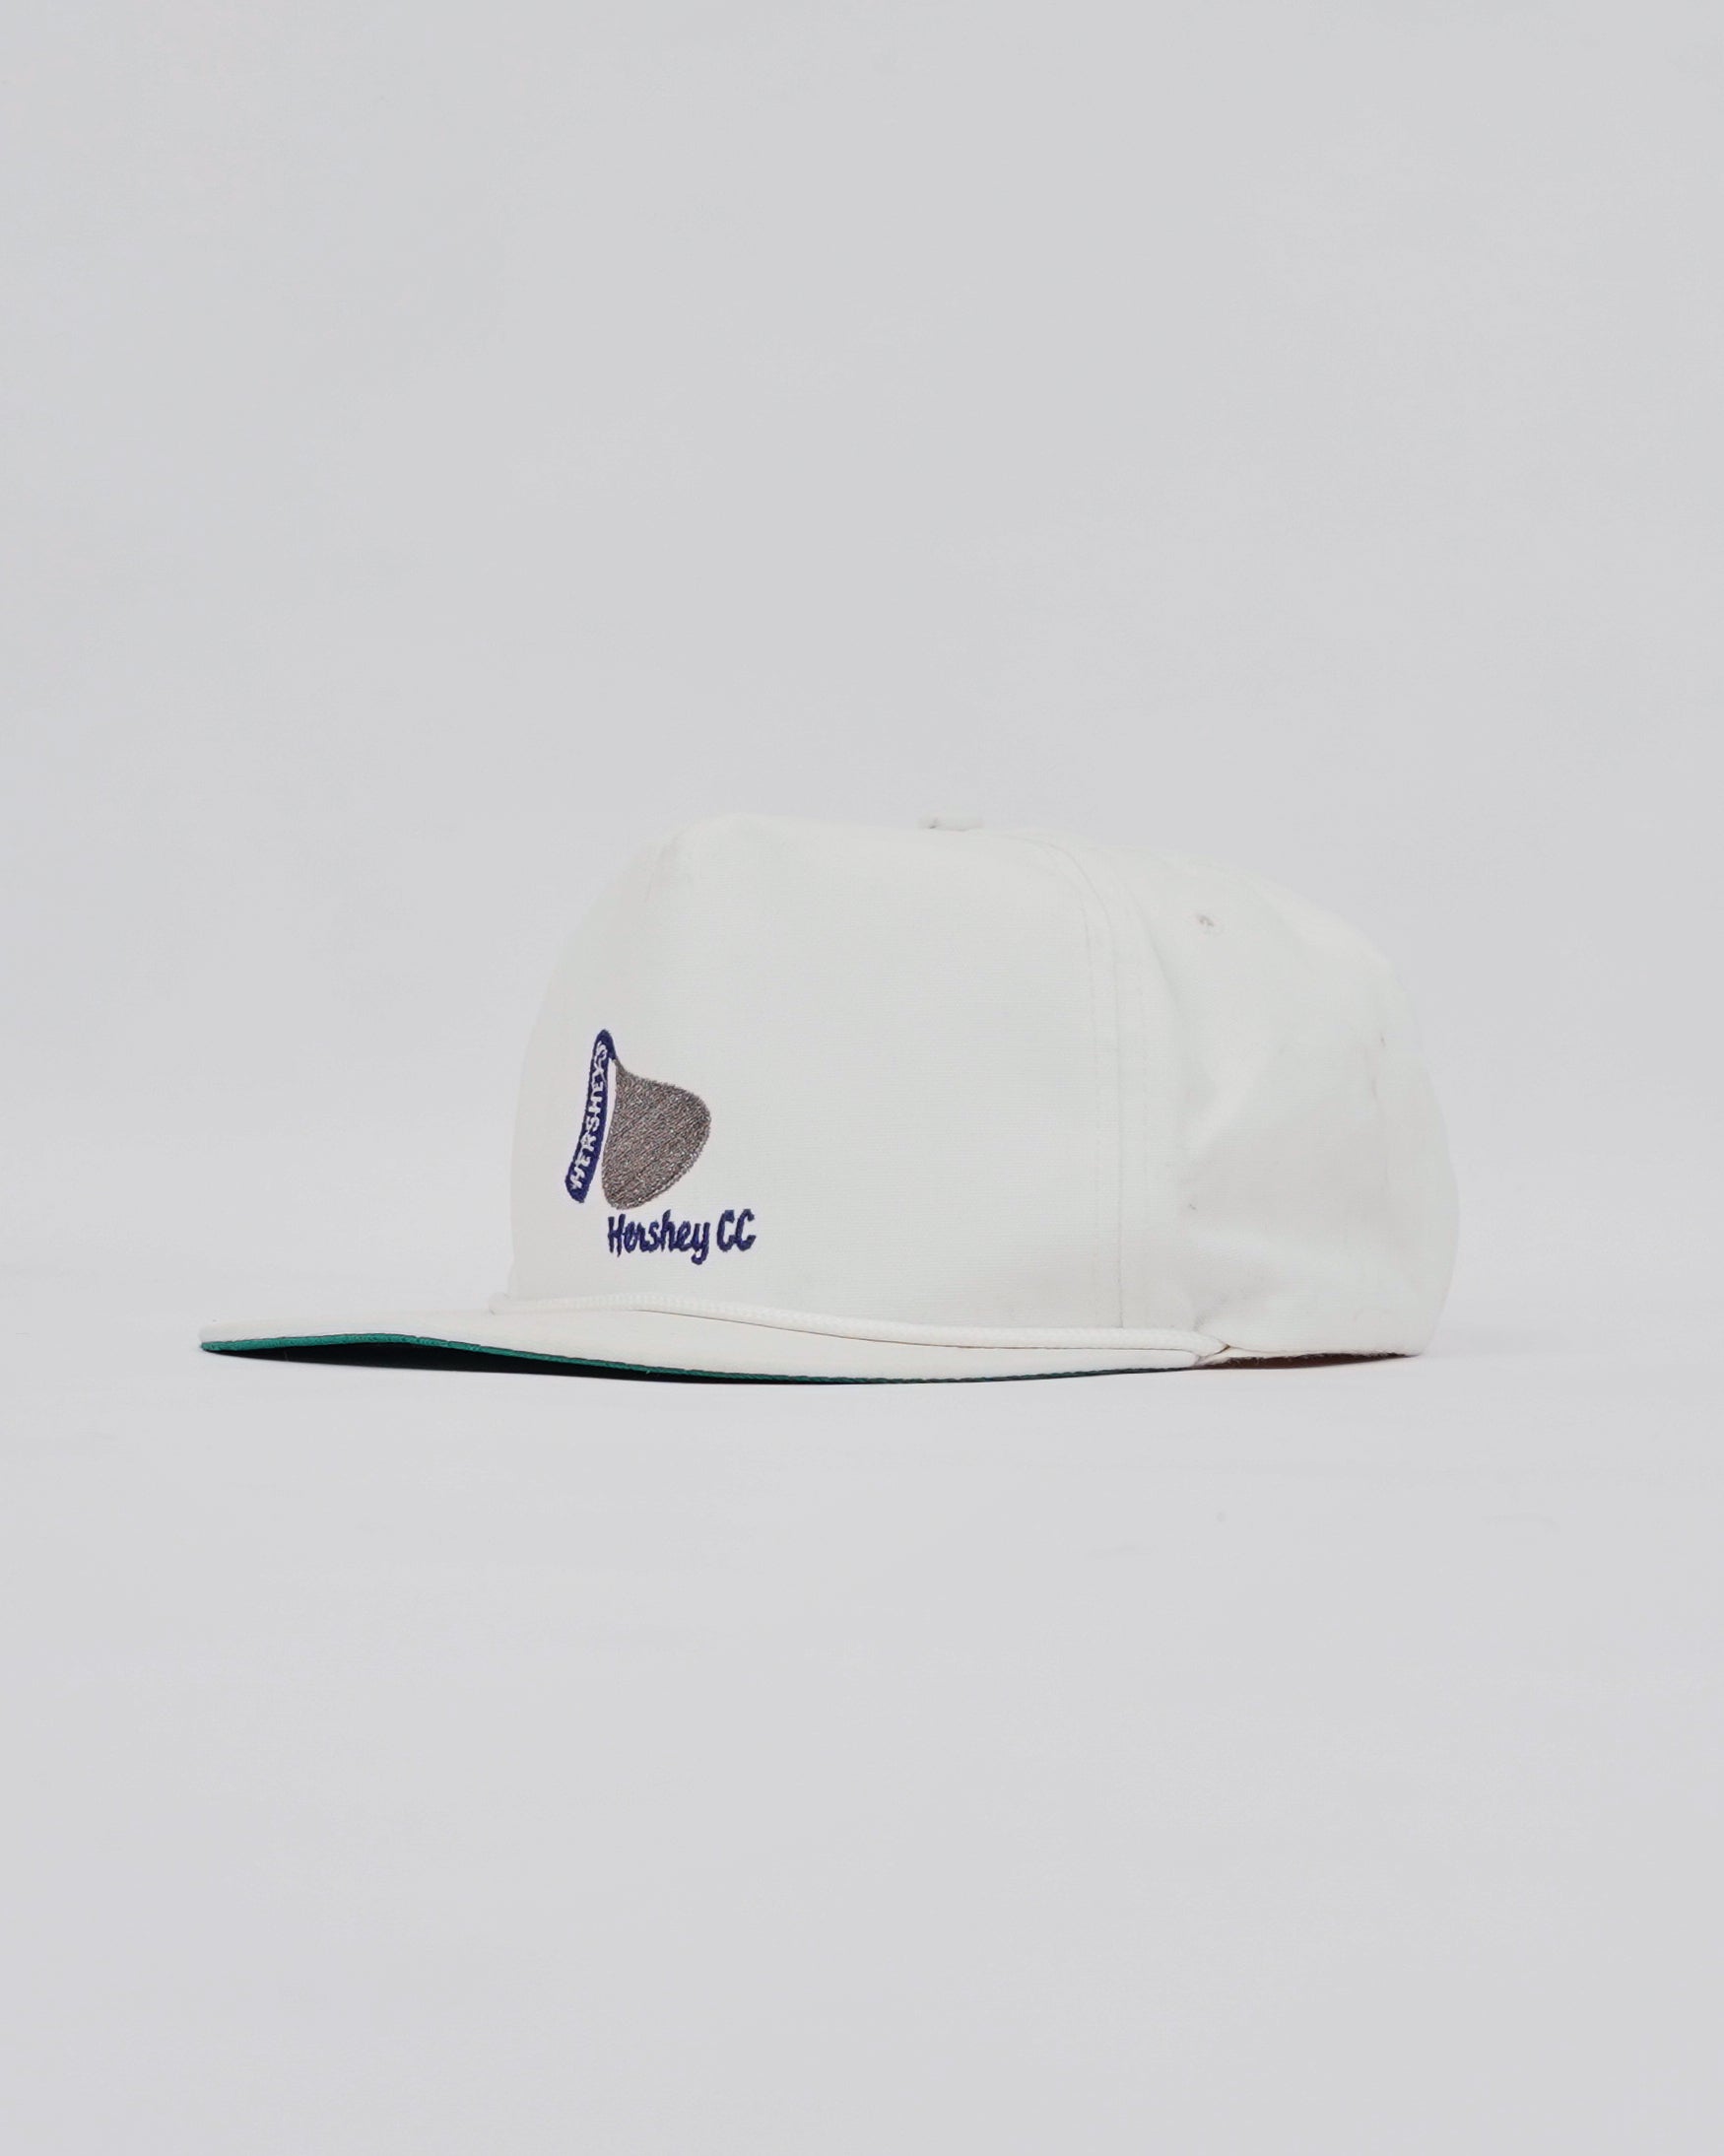 Made in USA Hershey's Derby Cap